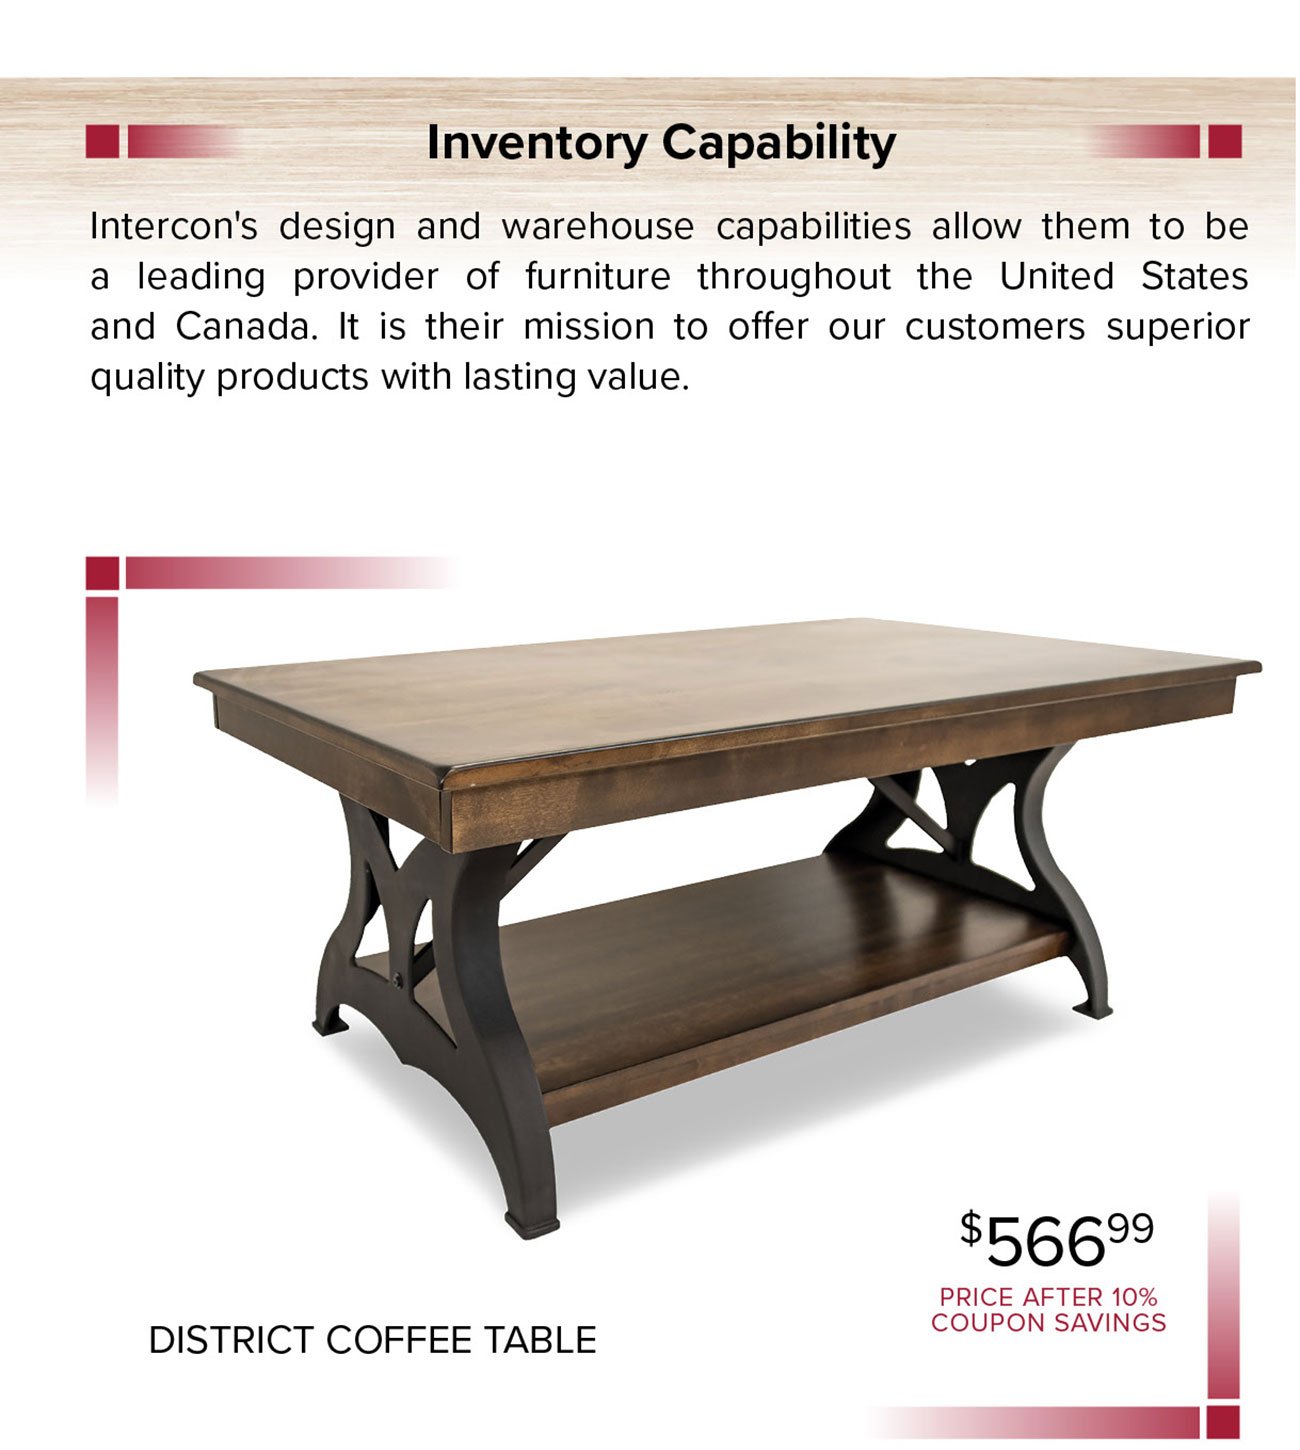 District-coffee-table